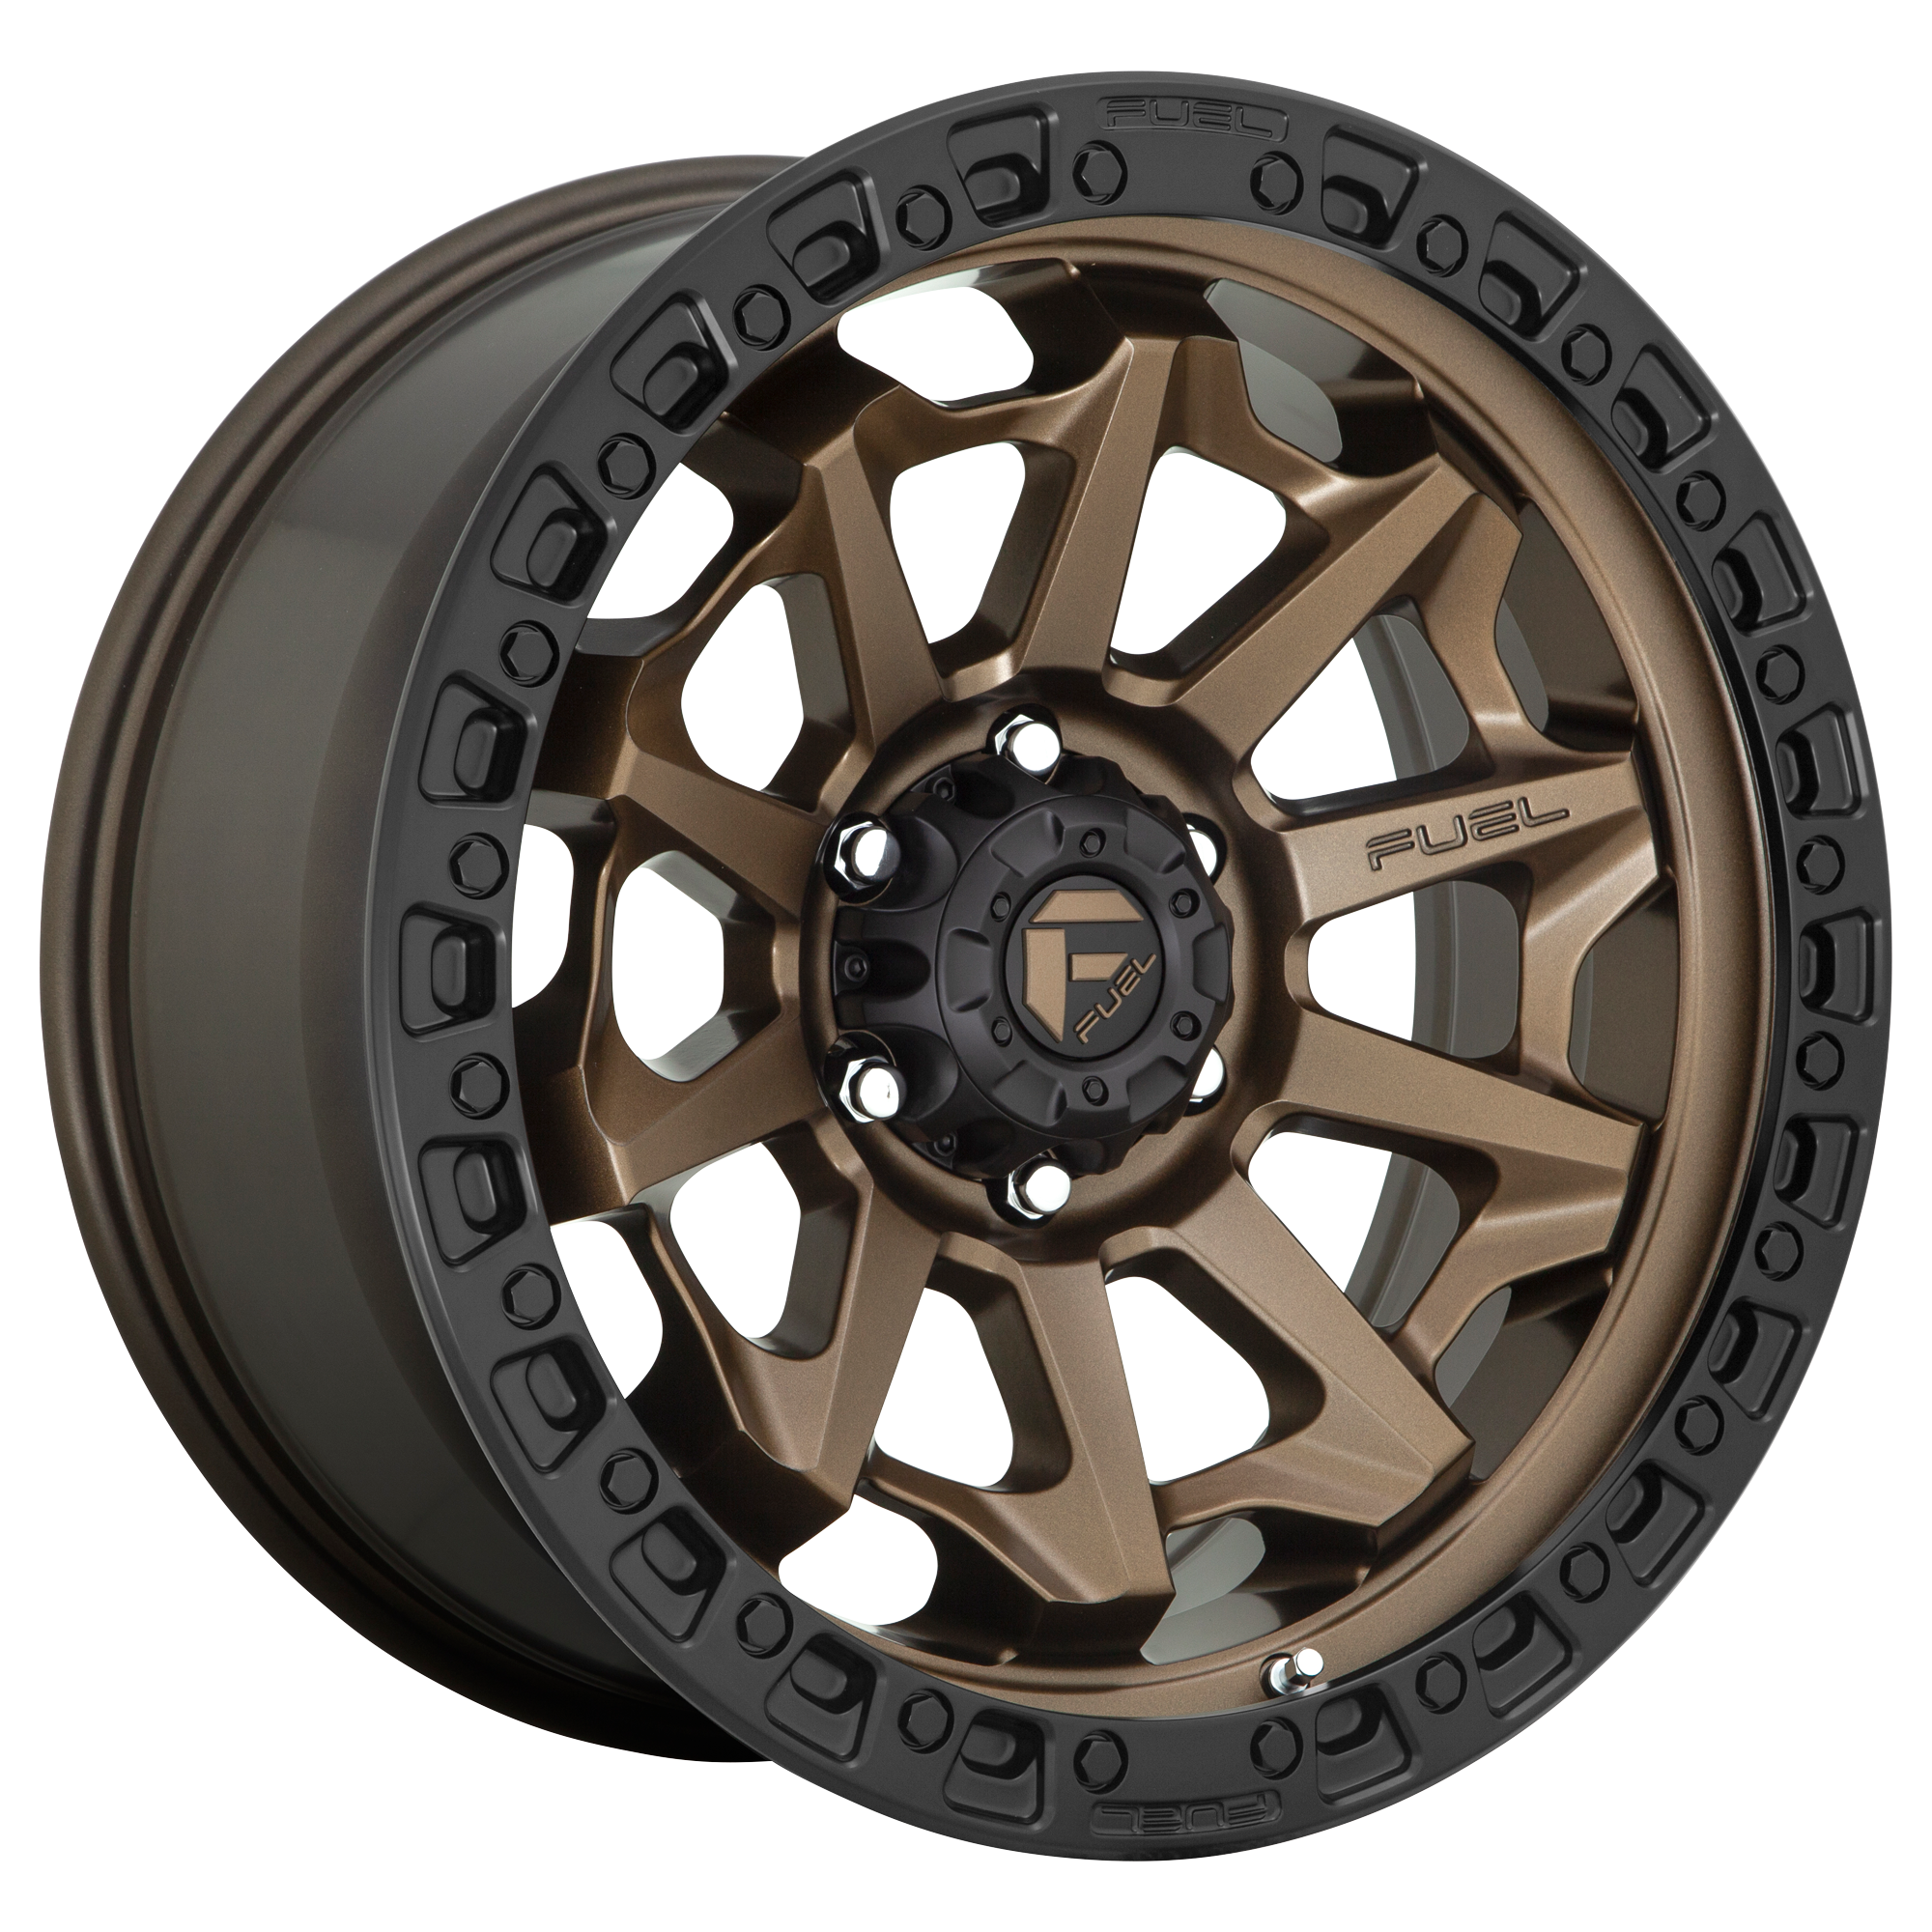 COVERT 20x9 8x170.00 MATTE BRONZE BLACK BEAD RING (1 mm) - Tires and Engine Performance